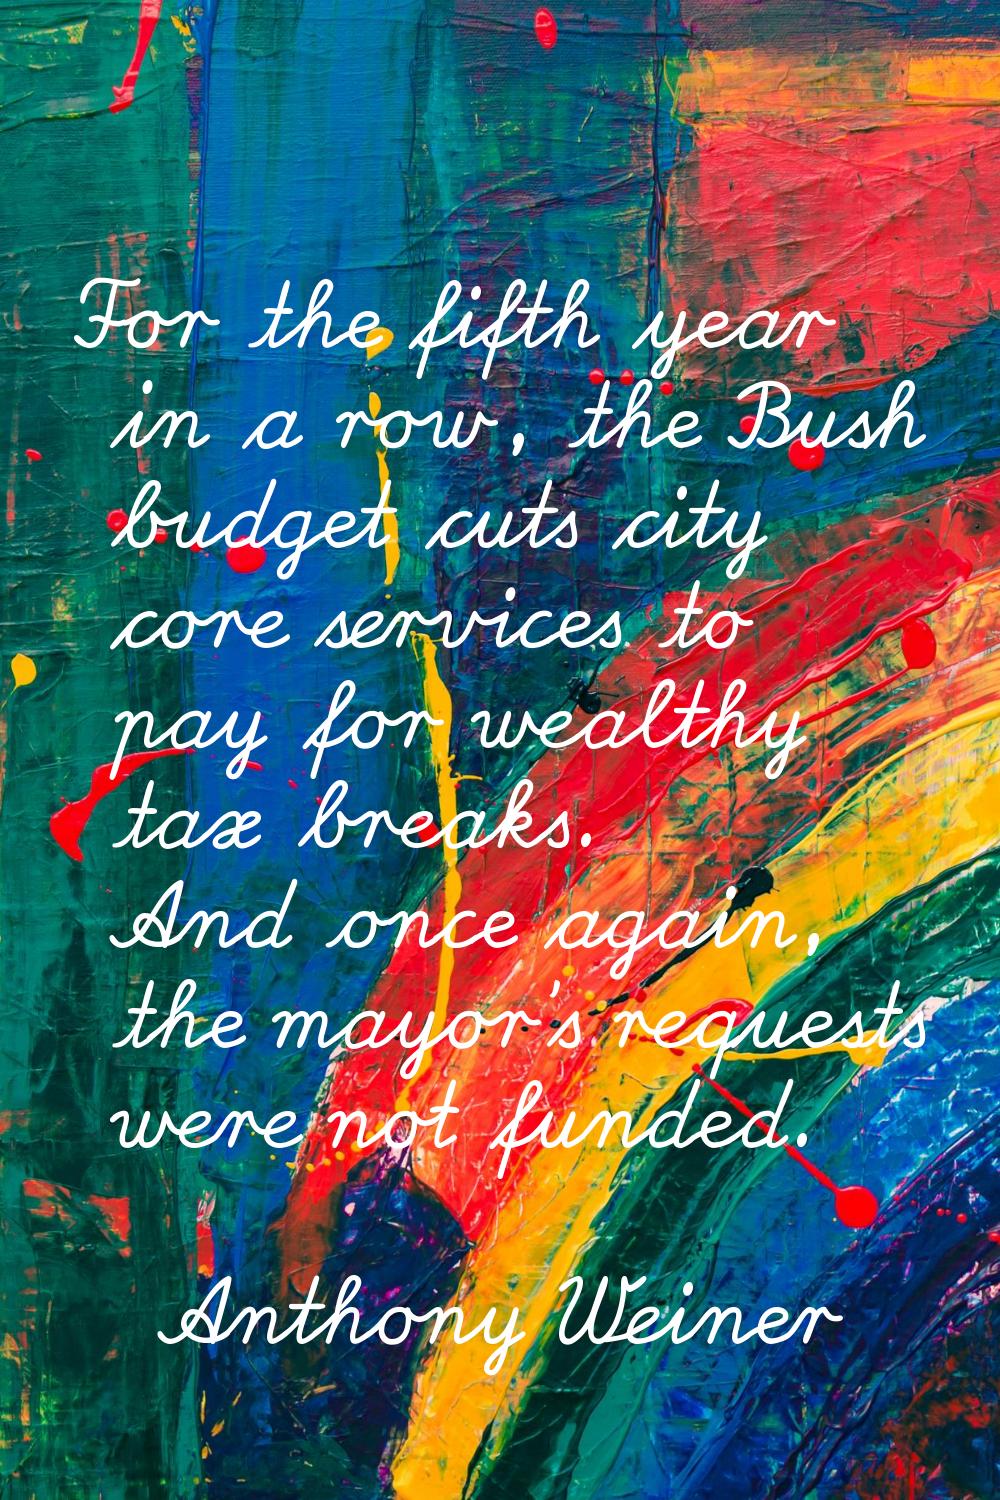 For the fifth year in a row, the Bush budget cuts city core services to pay for wealthy tax breaks.